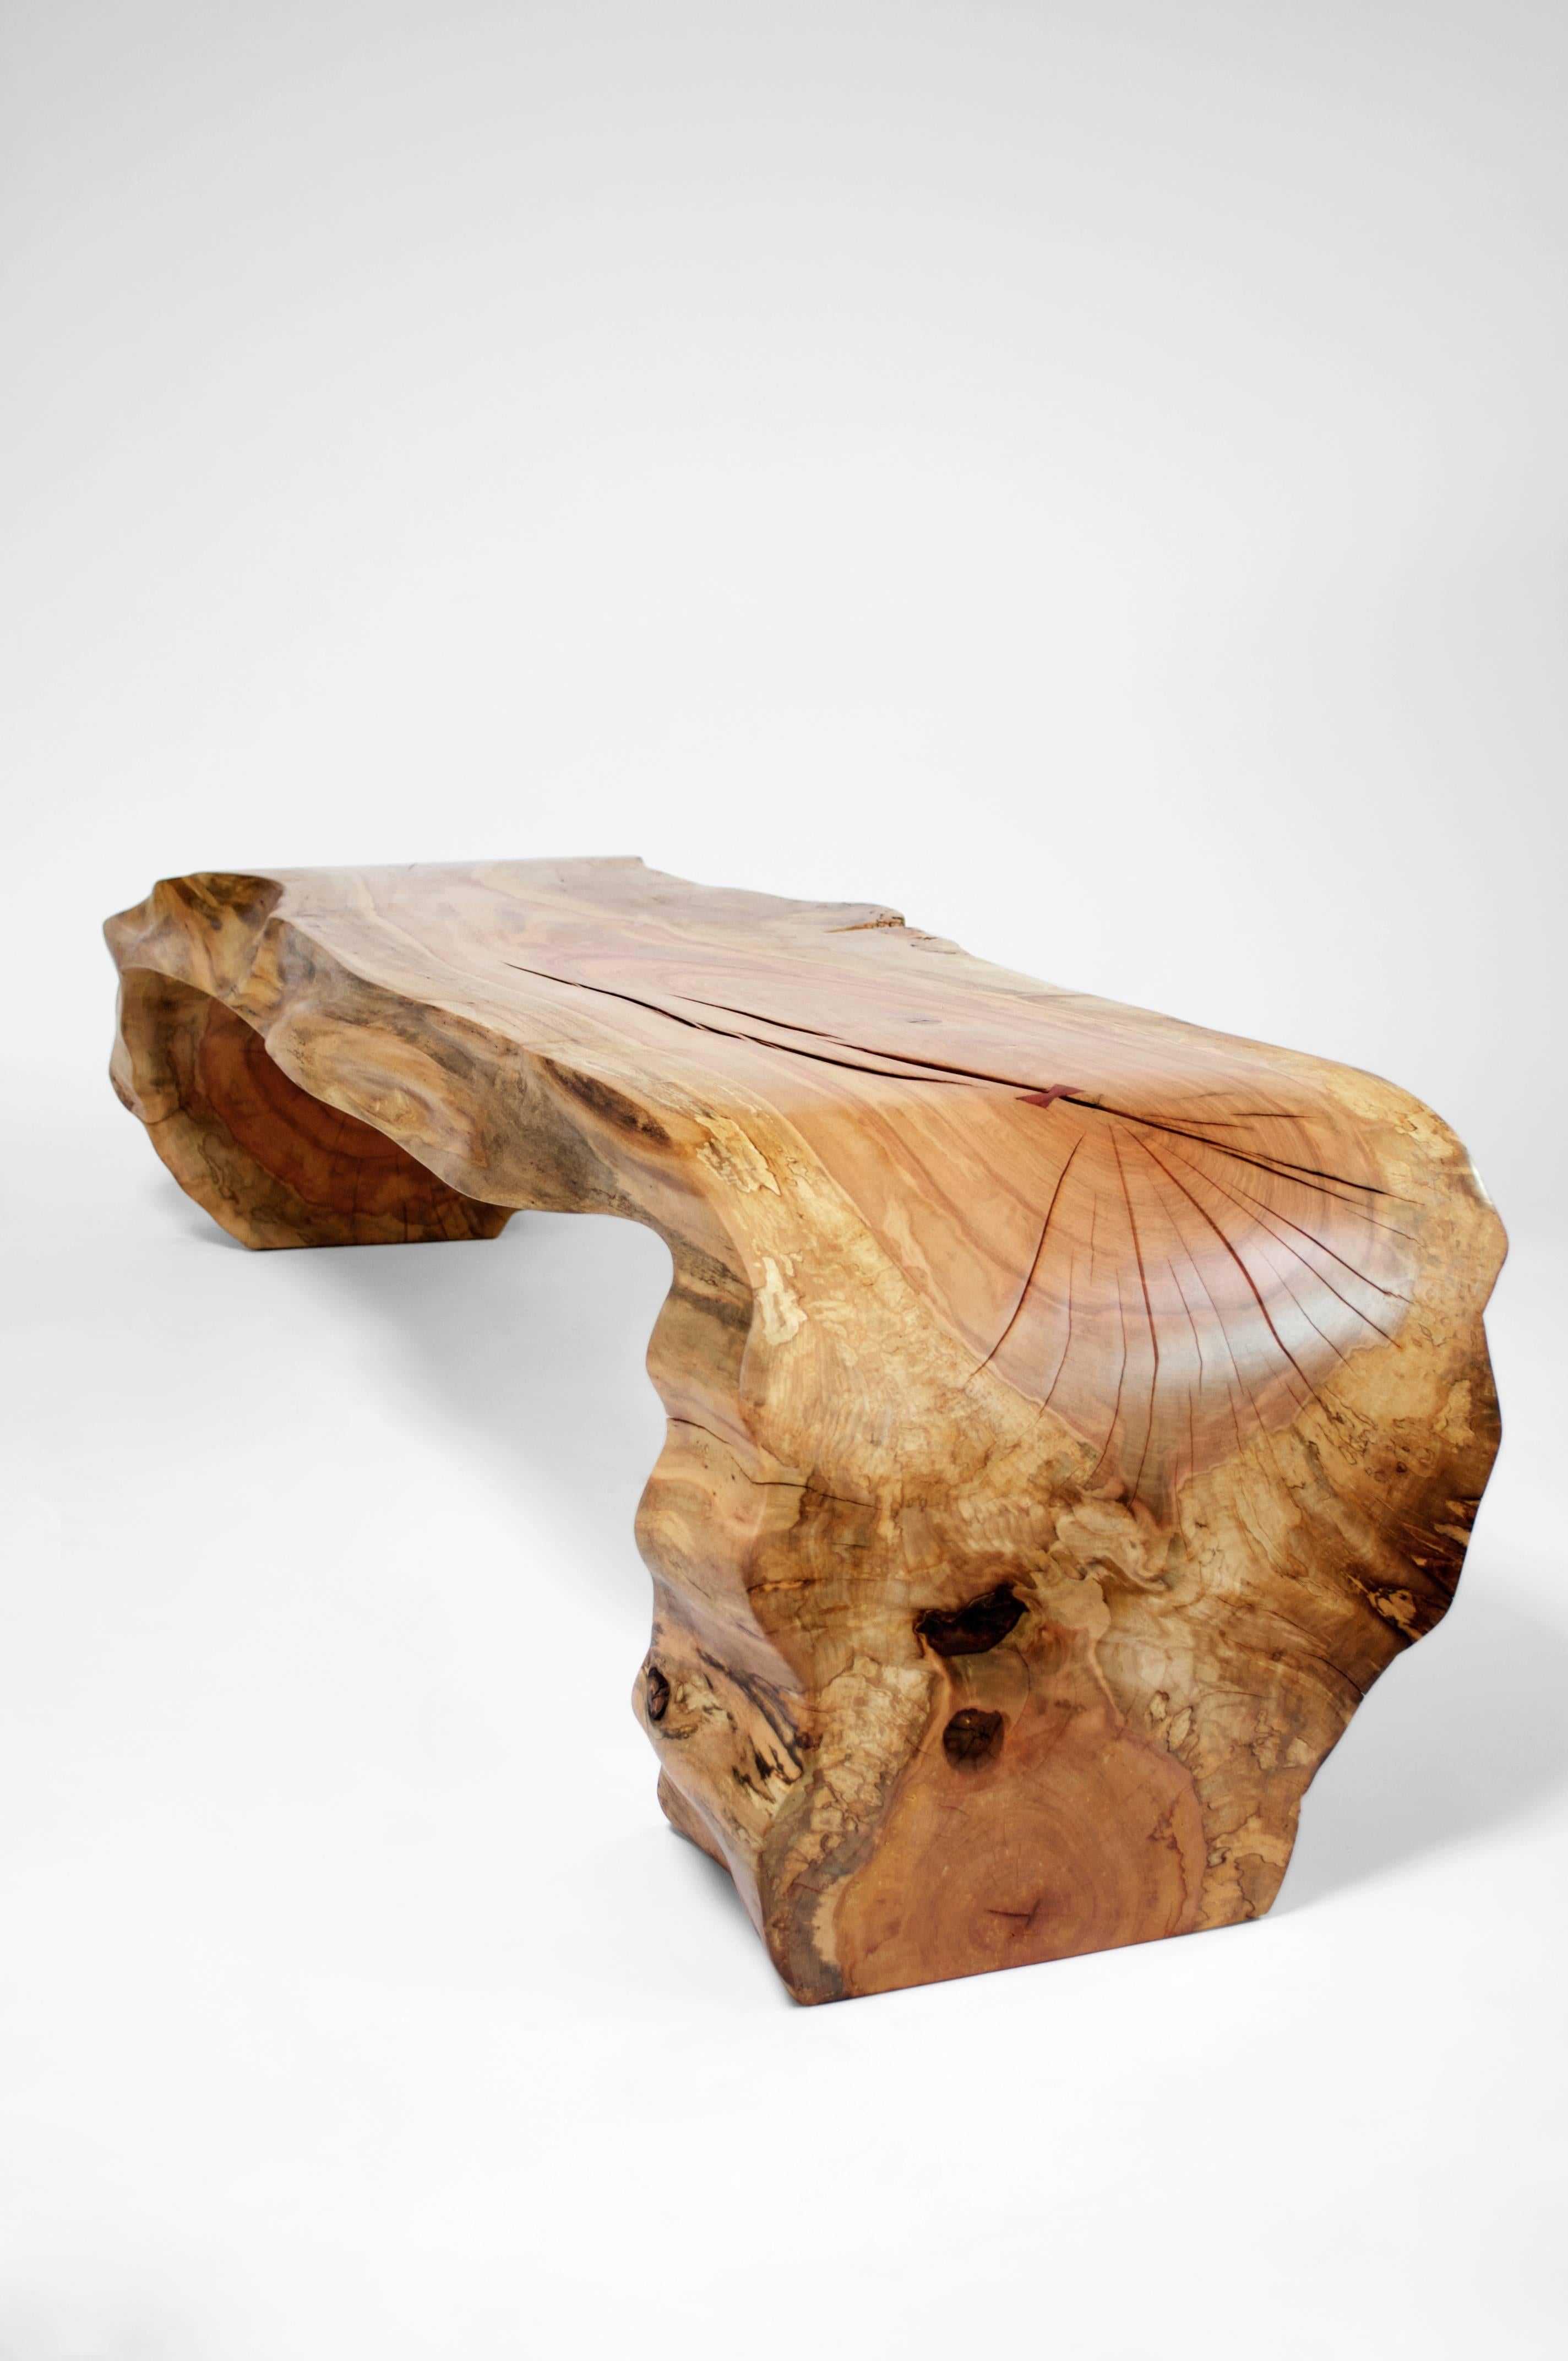 Unique signed bench by Jörg Pietschmann
Bench· Norway Maple·
Measures: H 40 x W 172 x D 55 cm
Carved out from a tree trunk, reddish heartwood. Polished oil finish.

In Pietschmann’s sculptures, trees that for centuries were part of a landscape